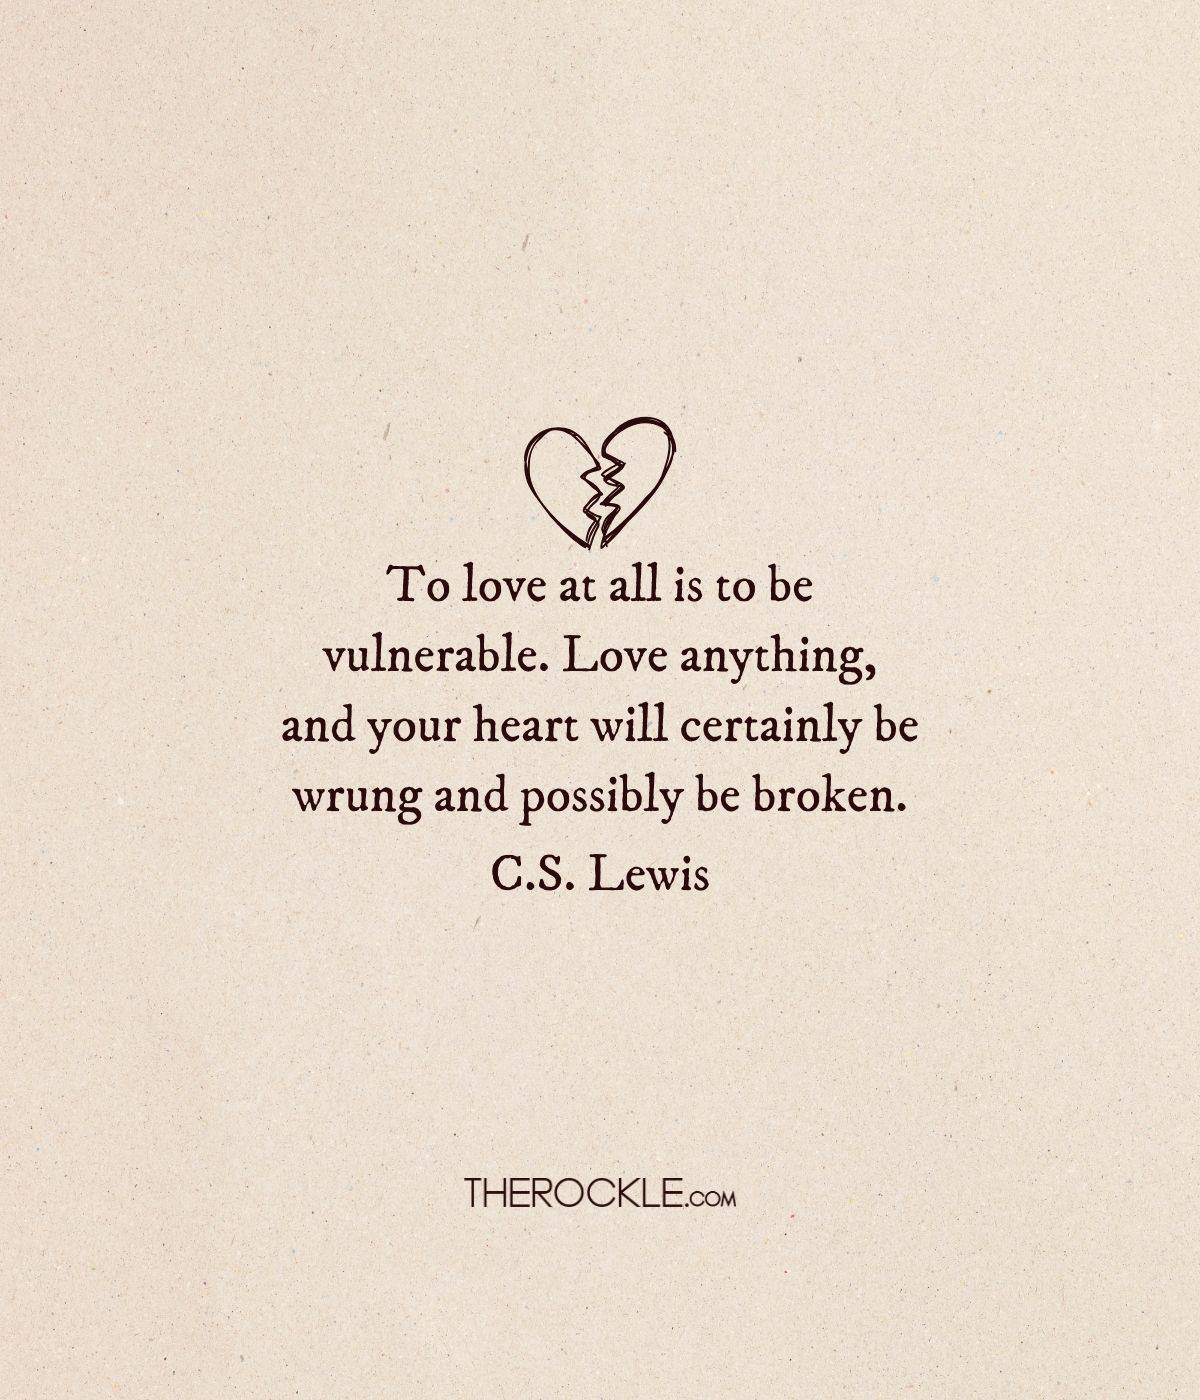 C.S. Lewis on love and vulnerability 